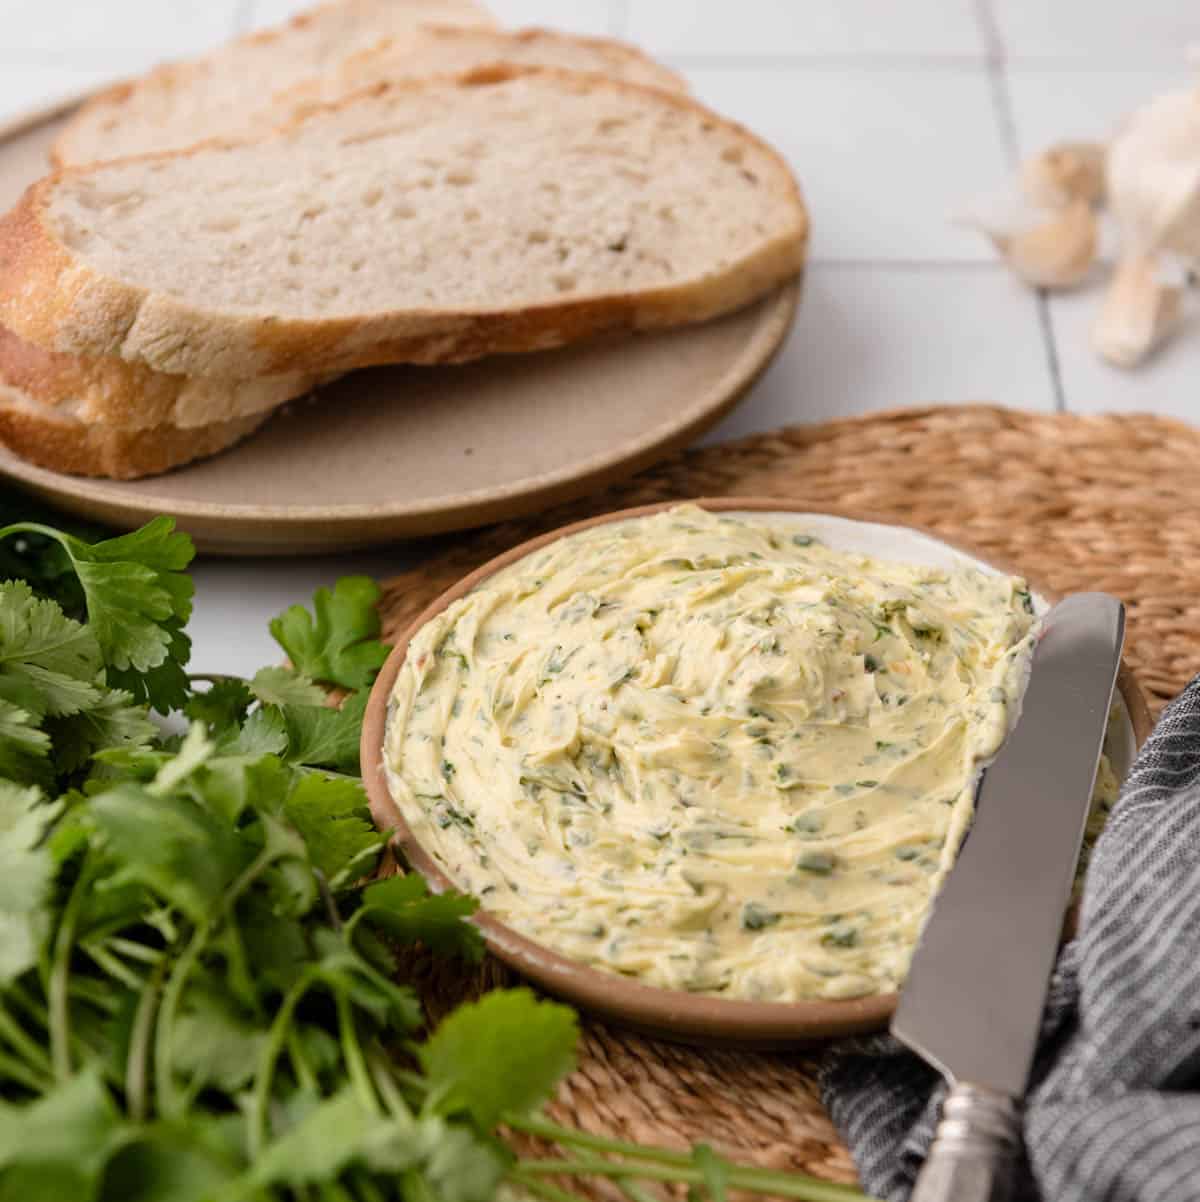 chimichurri butter on a plate with a knife, bread, parsley and cilantro next to it